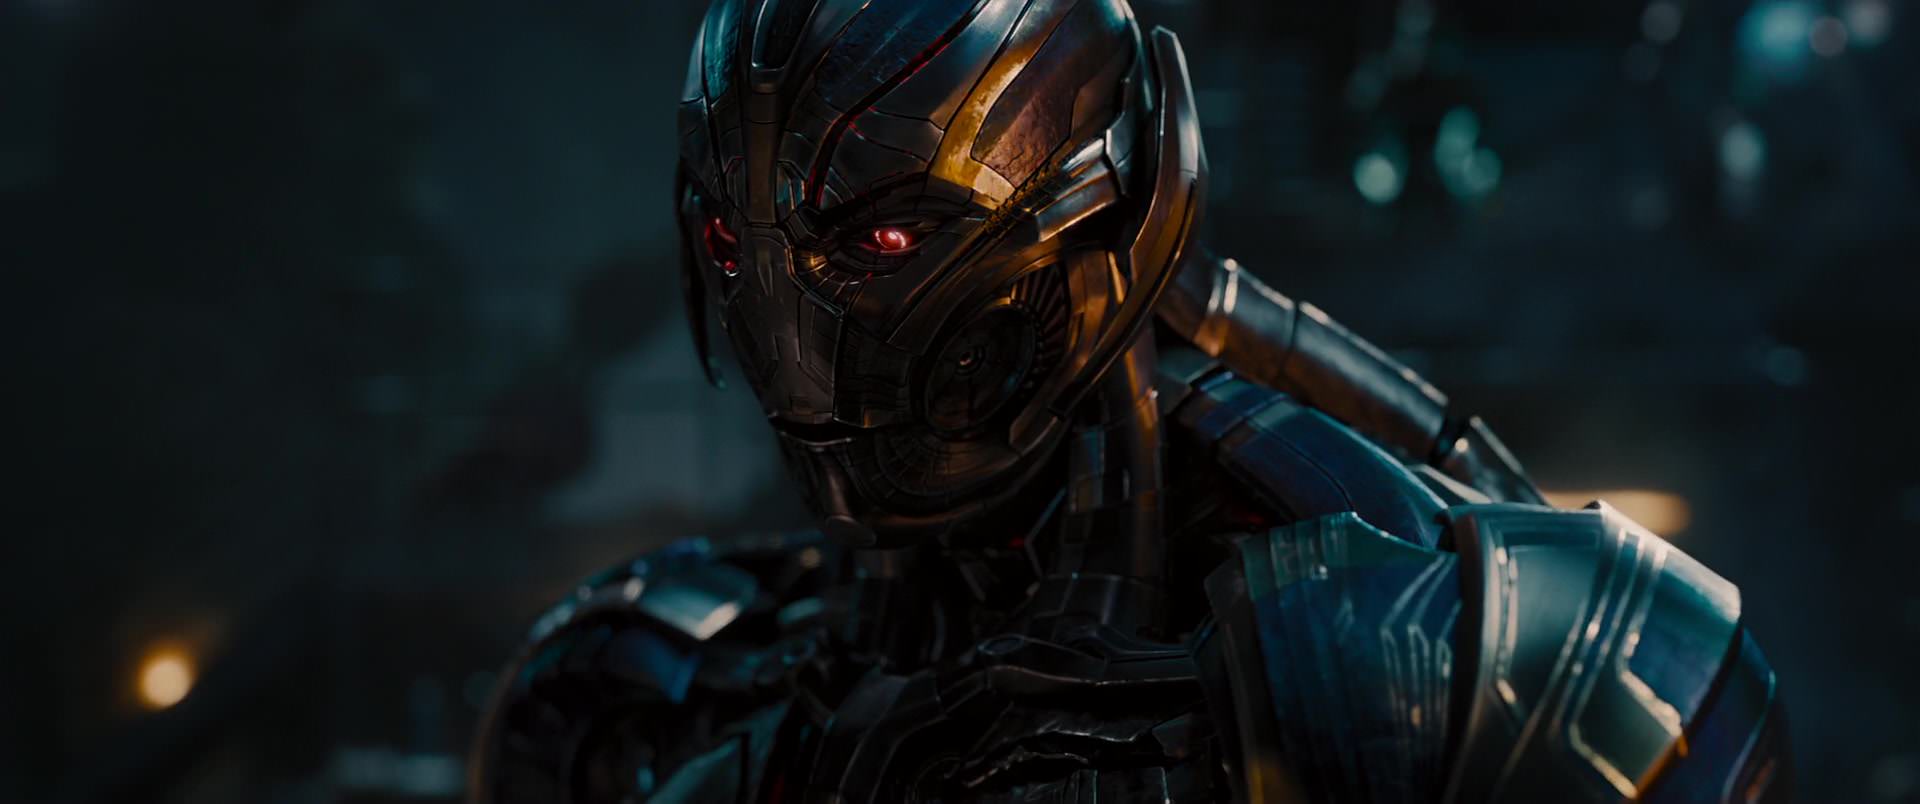 avengers age of ultron full movie in hindi download 480p mp4moviez